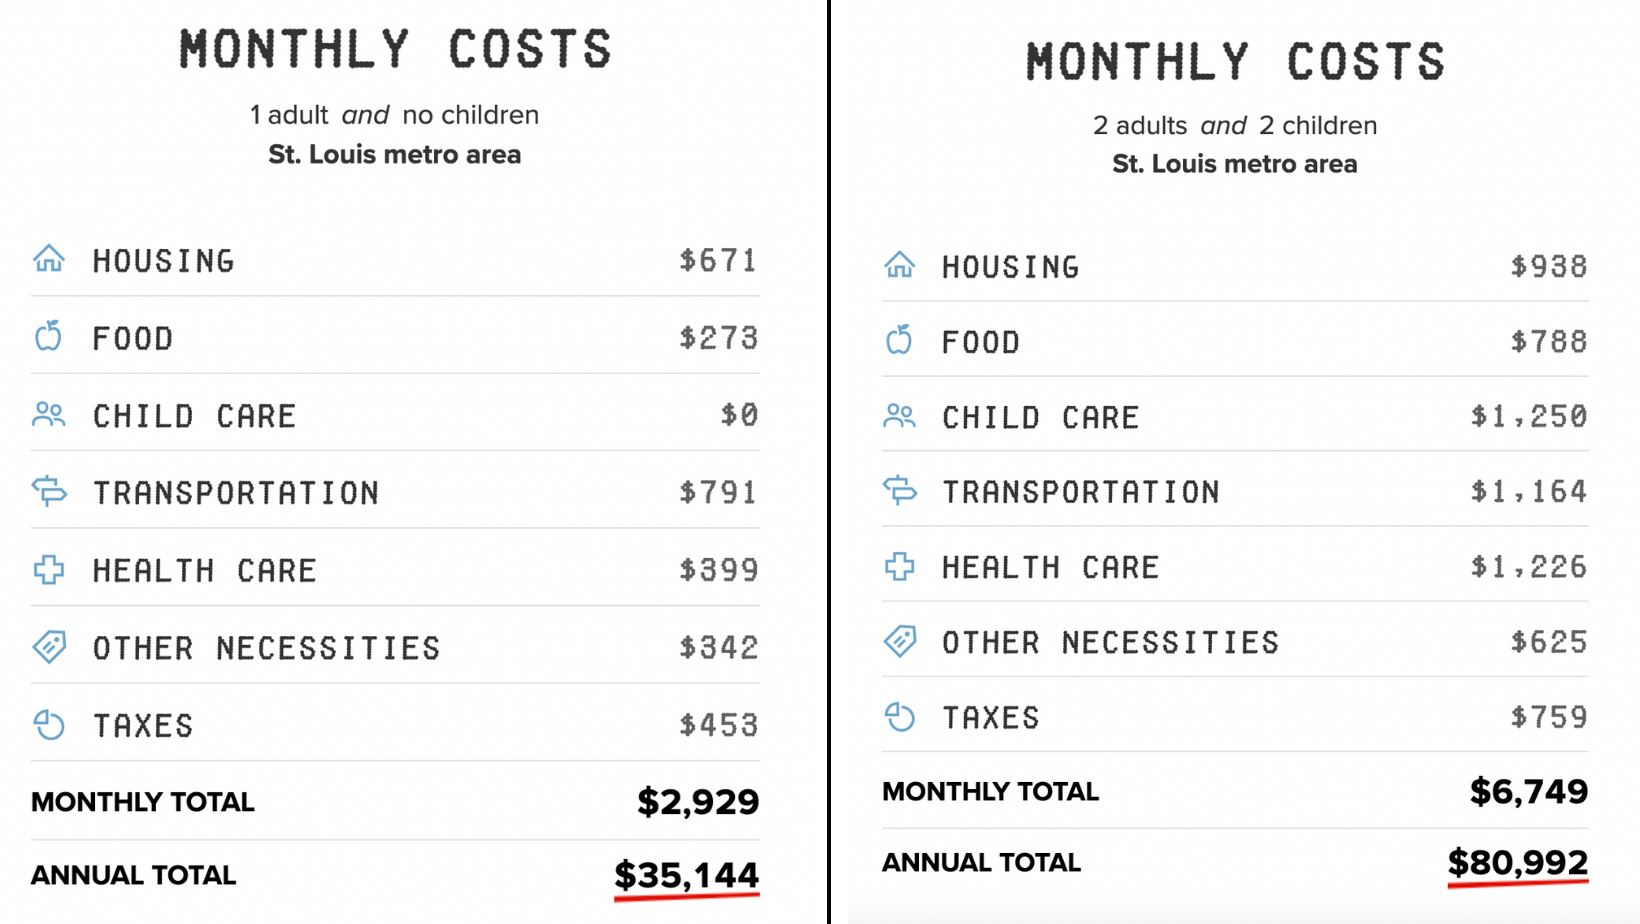 Screenshots showing monthly cost breakdowns for 1 adult and no children. 2 adults and 2 children. In St. Louis.